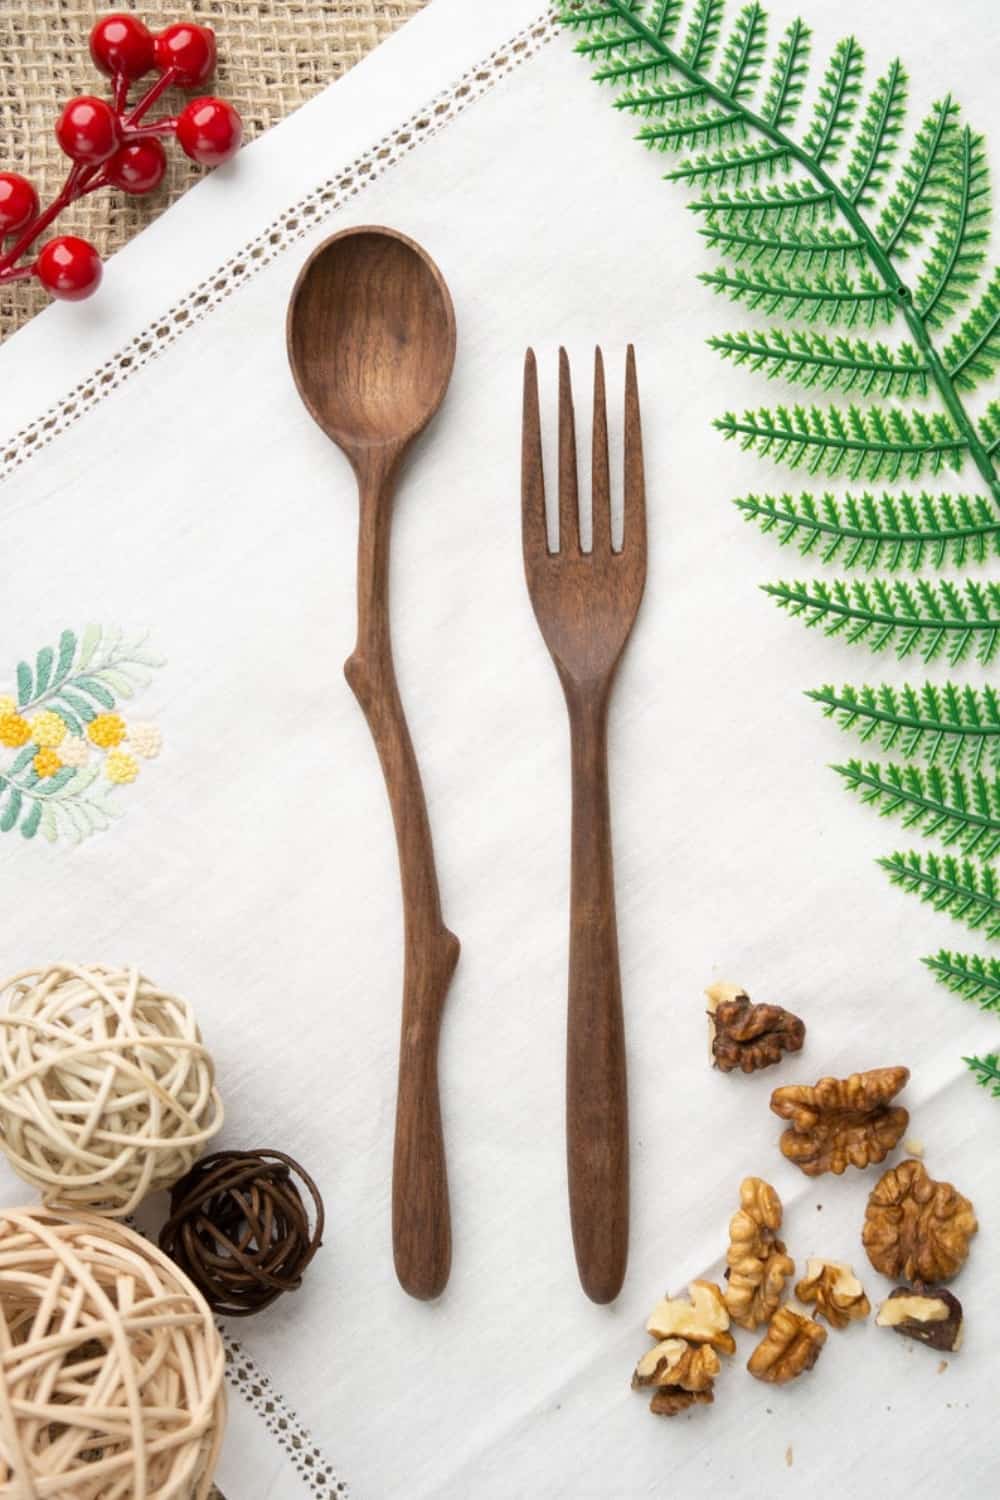 Sustainable and eco friendly cutlery not only look better and feel better, but they’re not taking a bite out of the planet every time you do the same. Image by Luala Silk #ecofriendlycutlery #sustainablecutlery #sustainablejungle